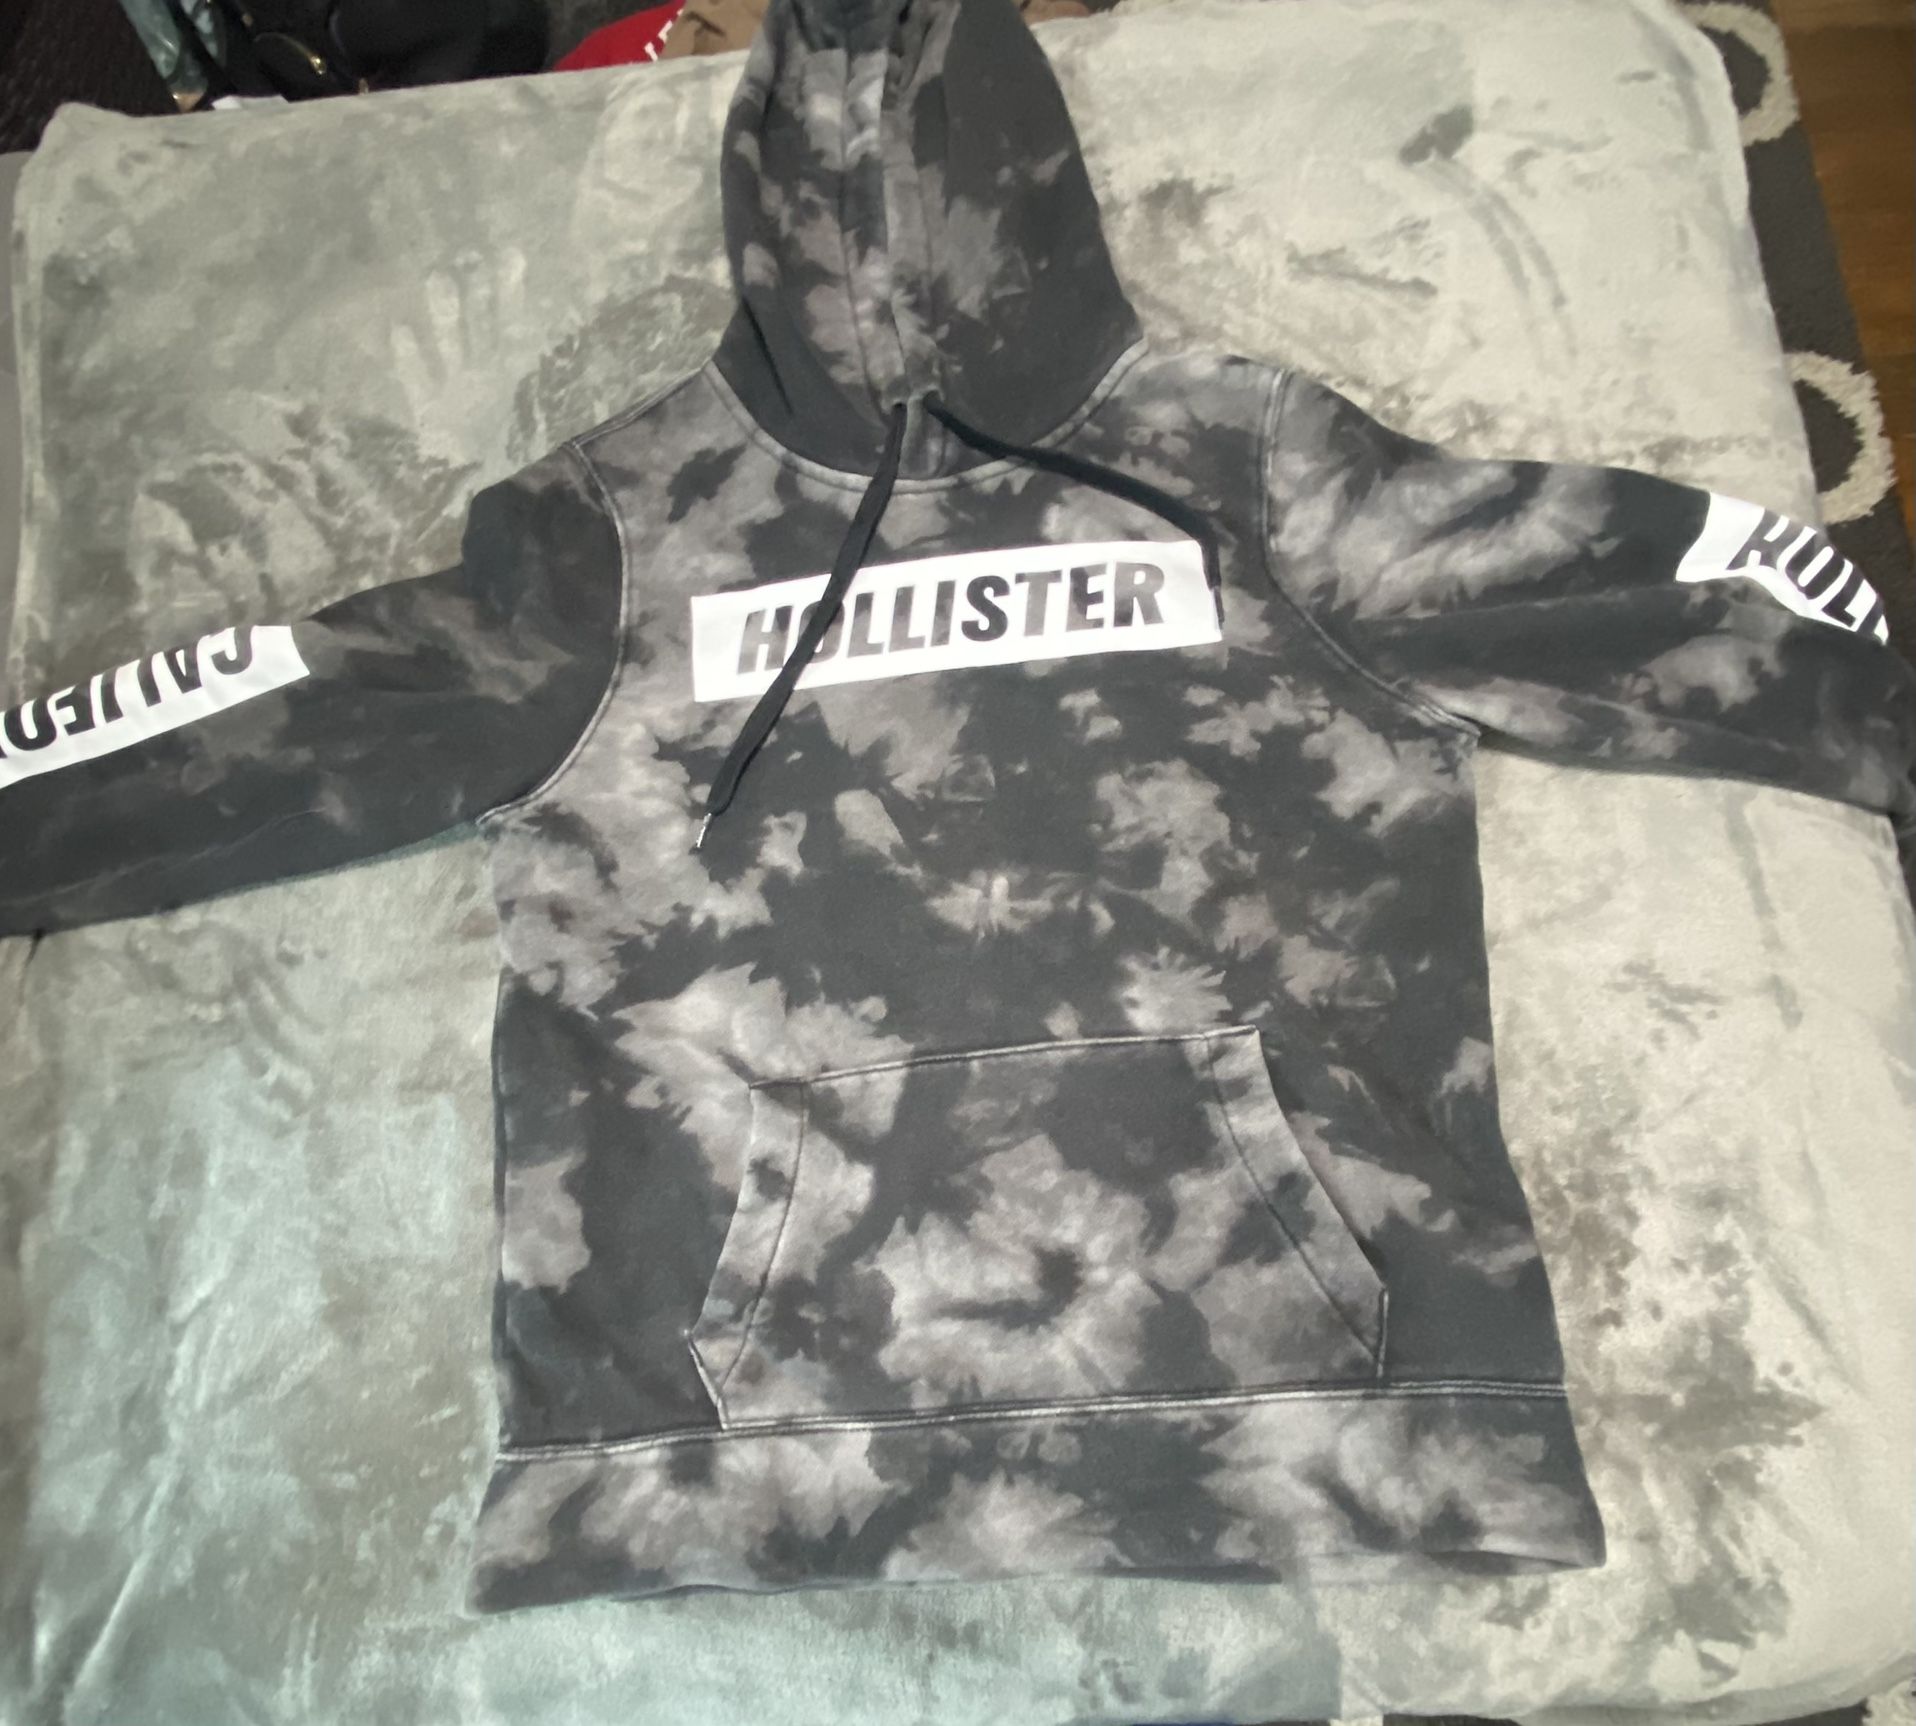 Hollister Hoodie Size S